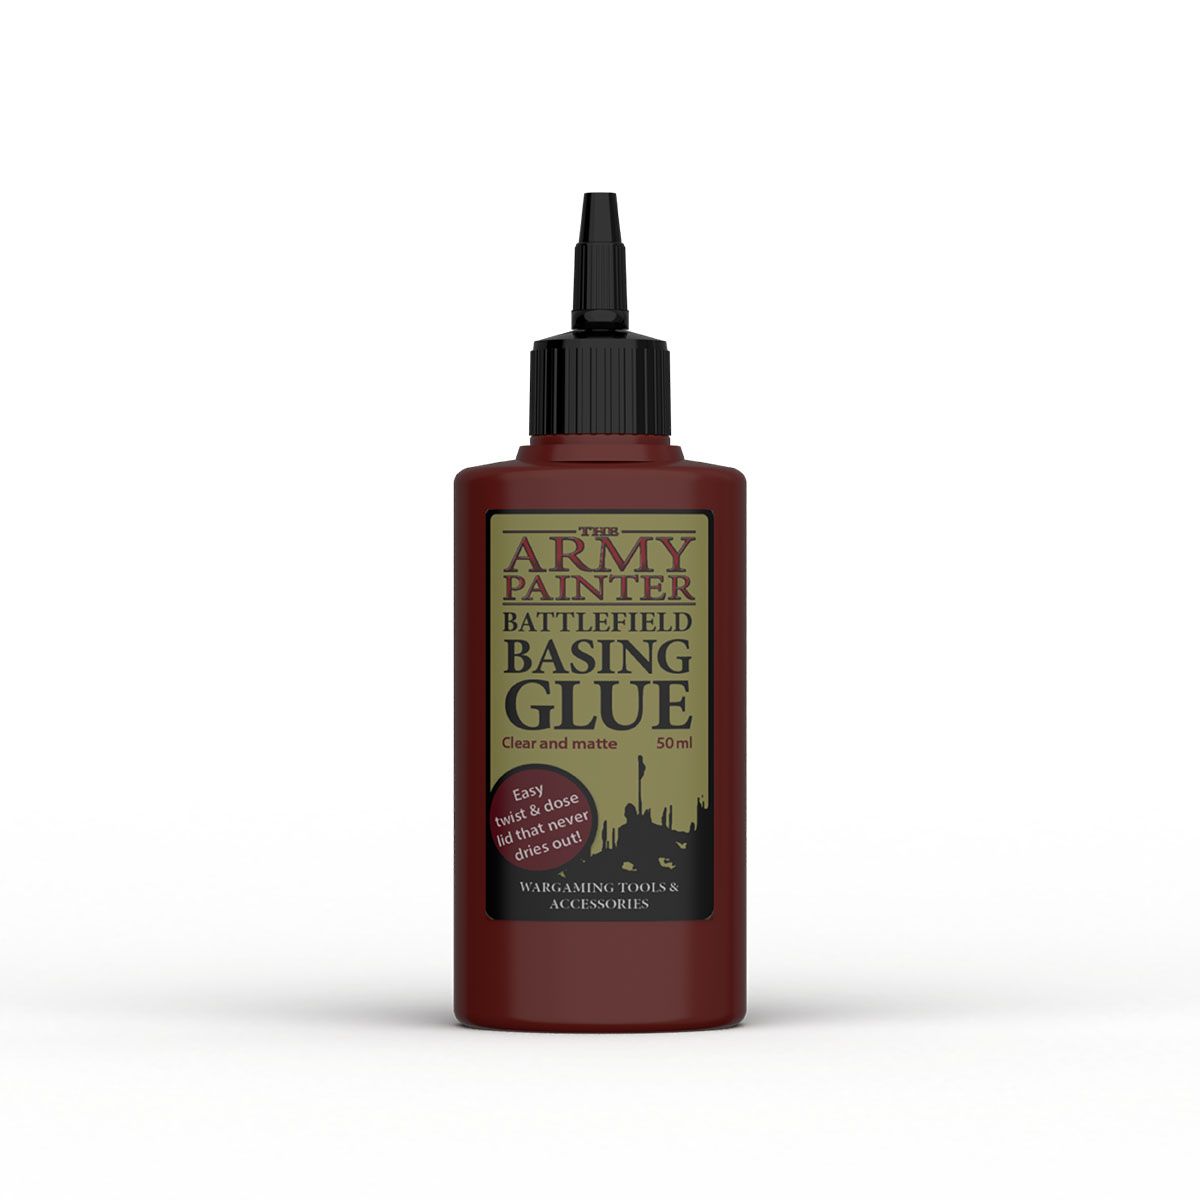 Battlefield Basing Glue (The Army Painter)